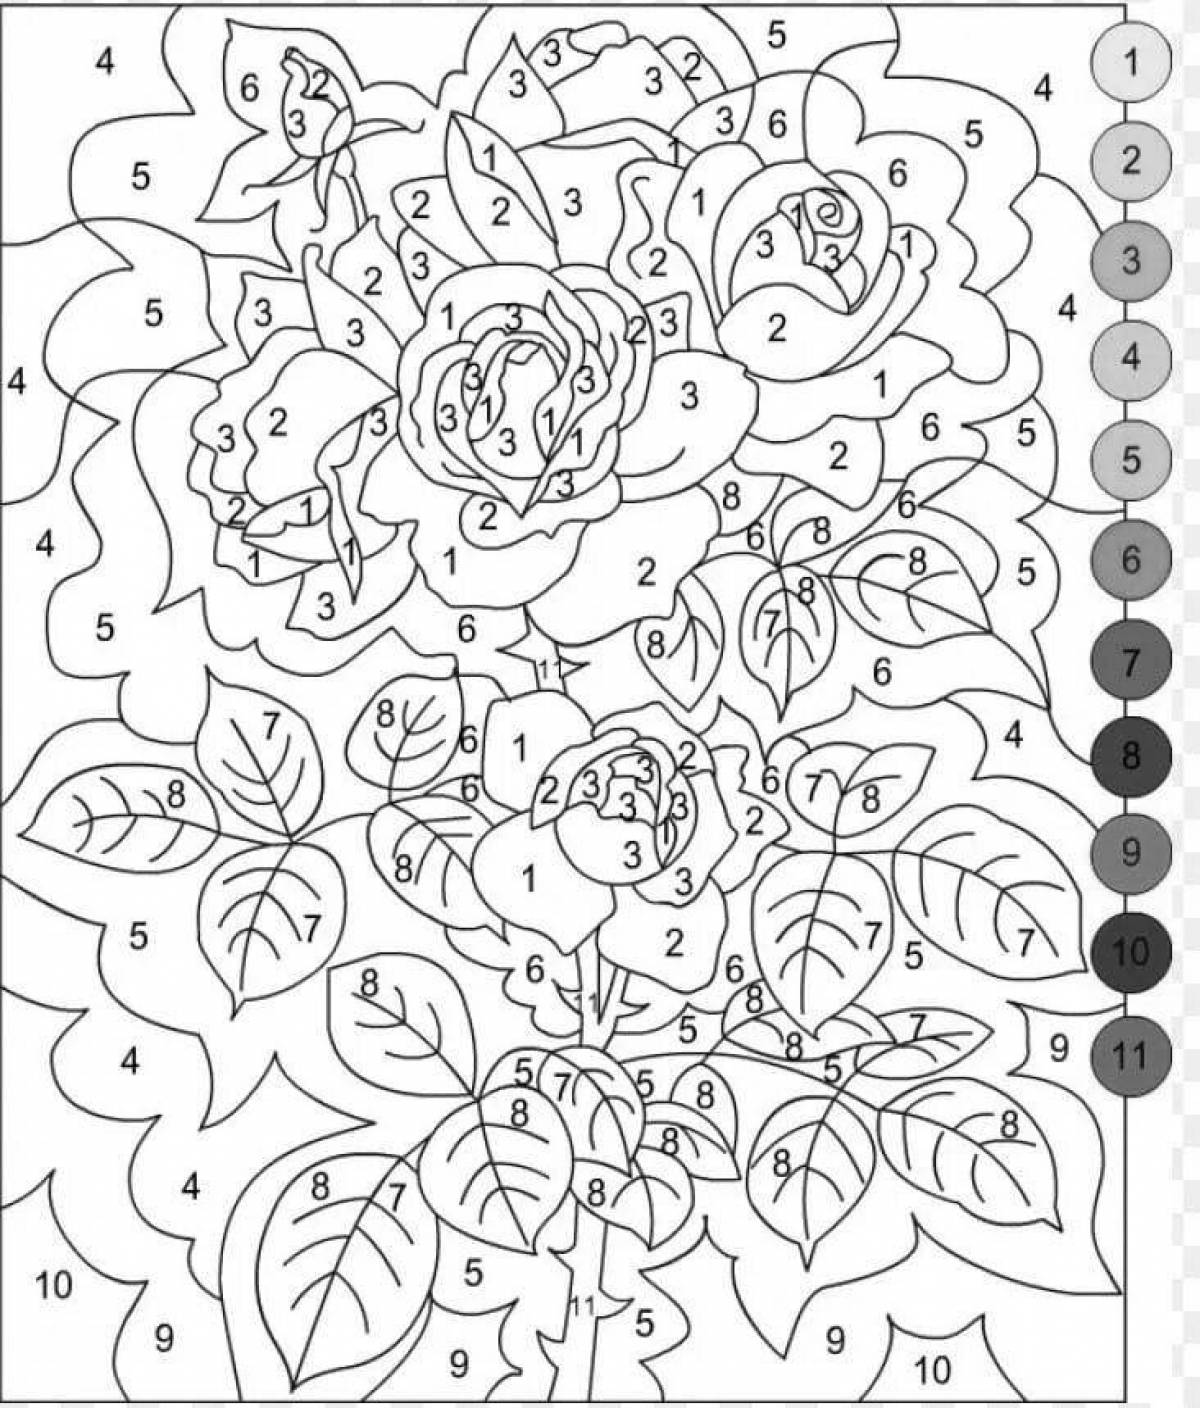 Jovial coloring by numbers